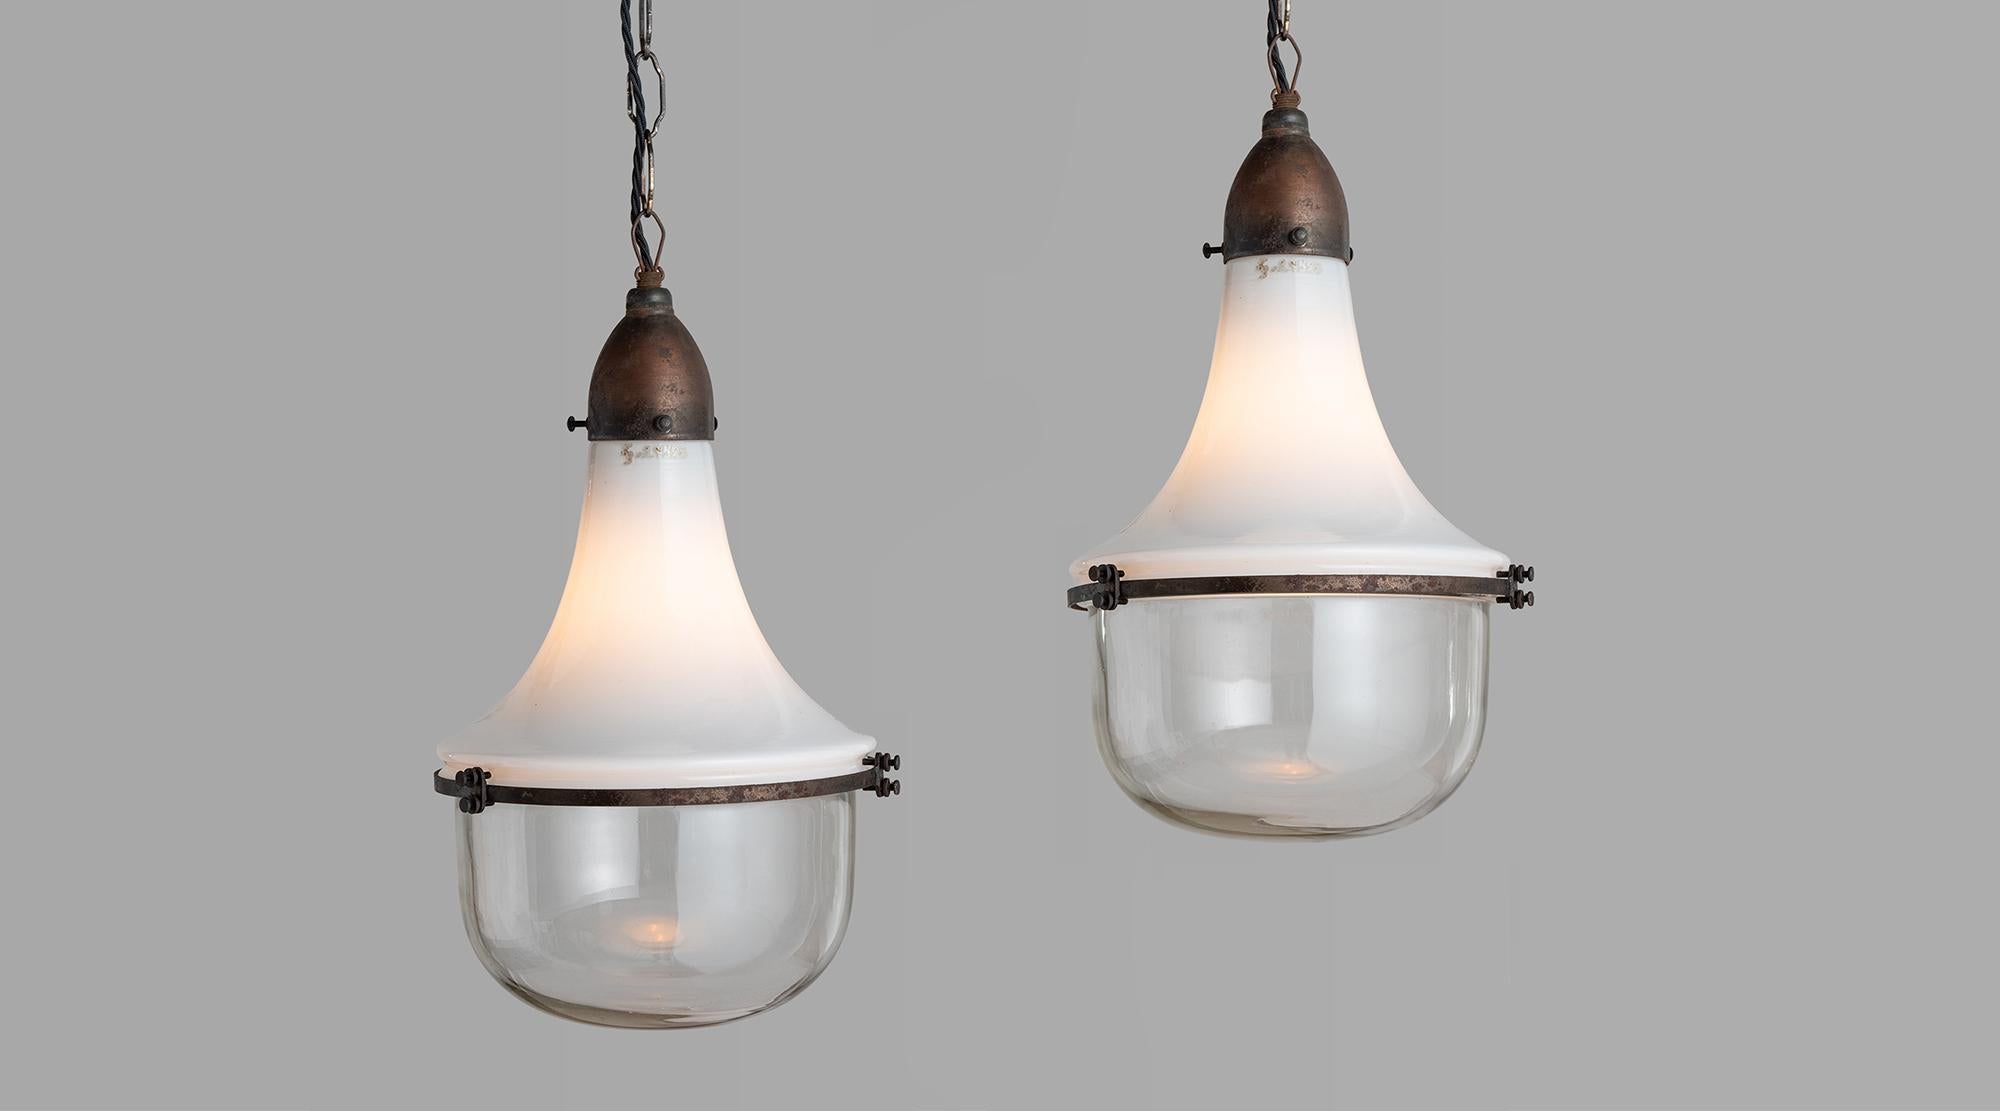 Two part pendant with opaline and clear glass shades, with copper brace and fitter.



Measures: 9.5